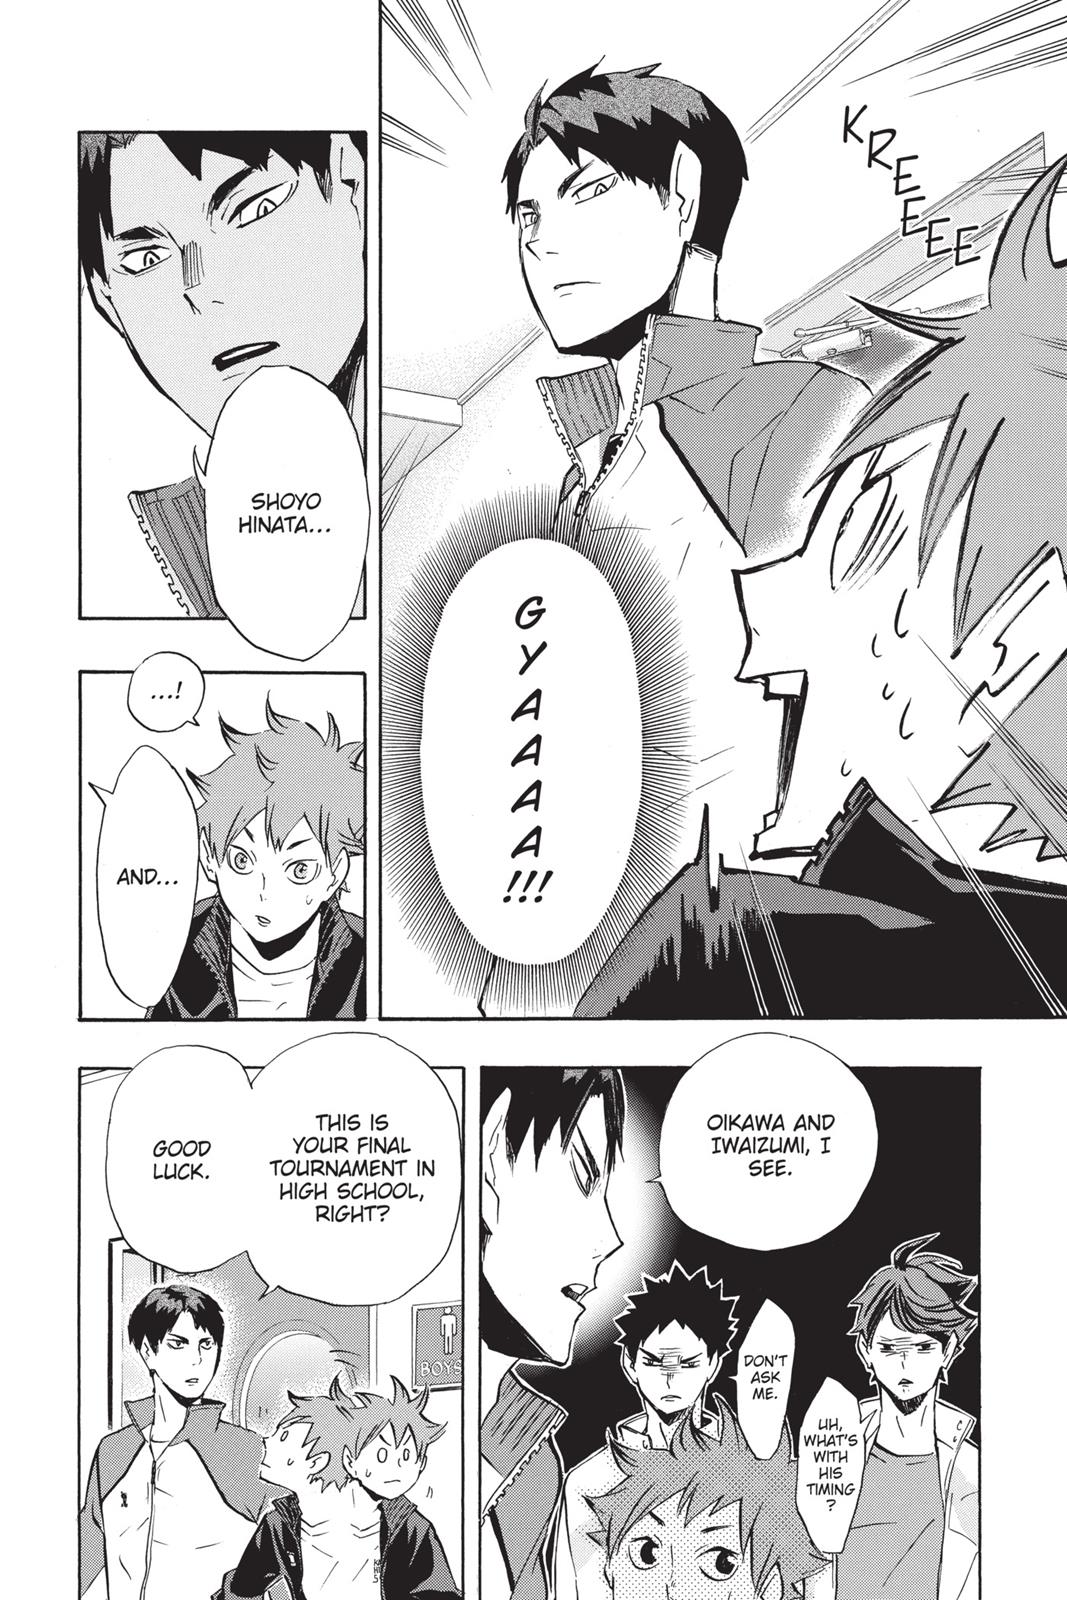  Chapter 108 image 015